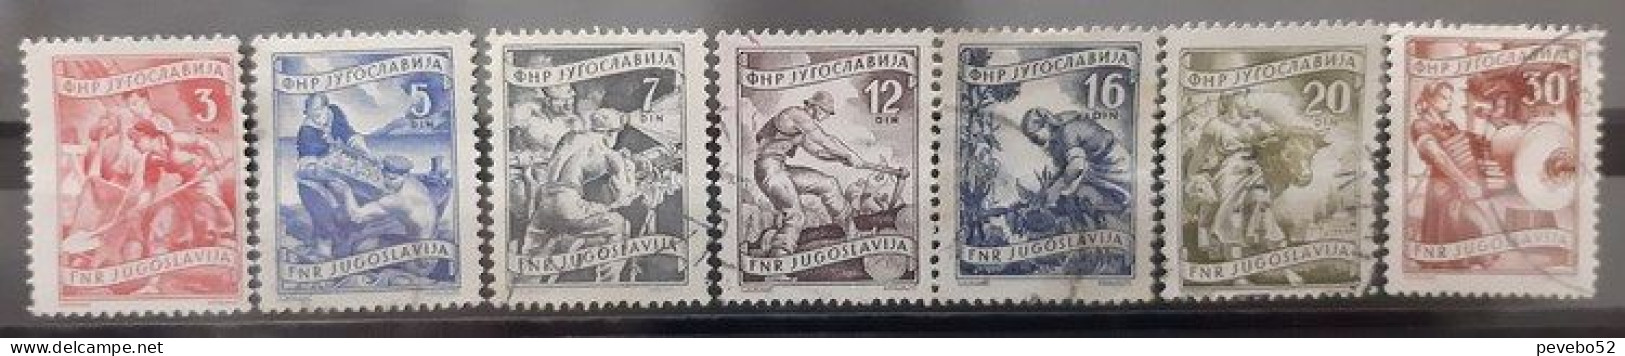 YUGOSLAVIA 1950 Construction Of The Belgrade-Zagreb Highway USED - Used Stamps